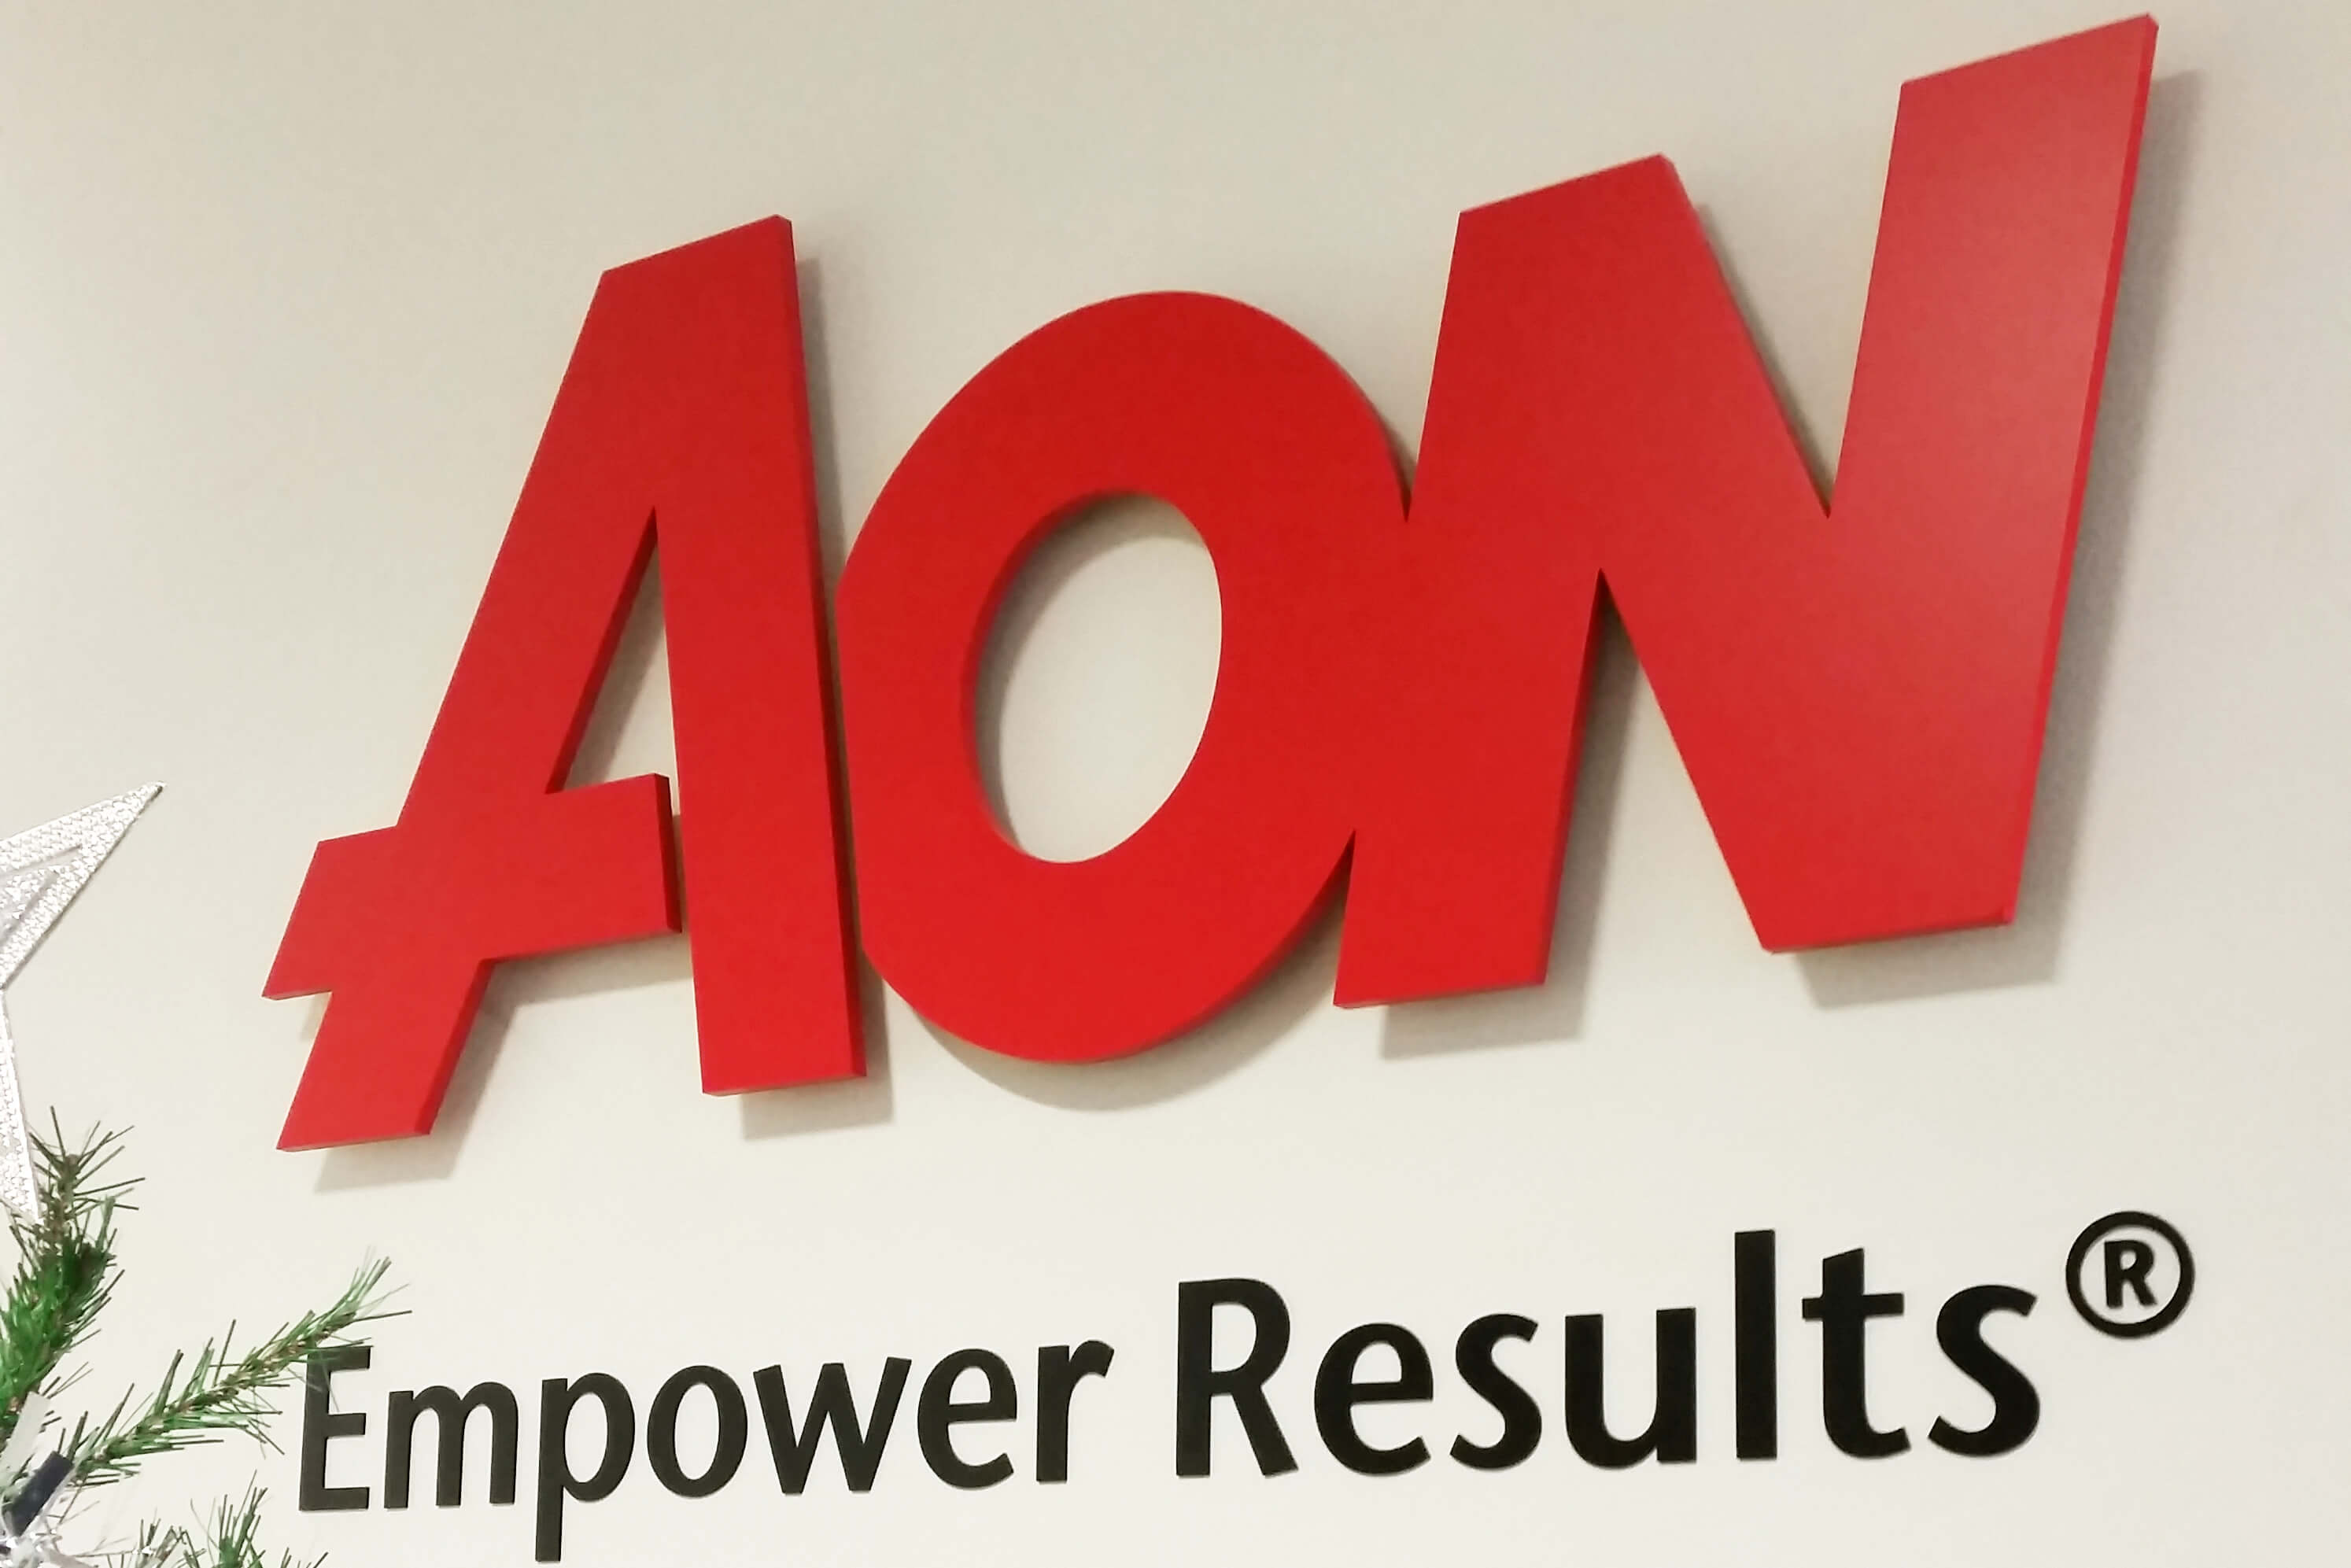 Aon Reinsurance Solutions creates global life and health group